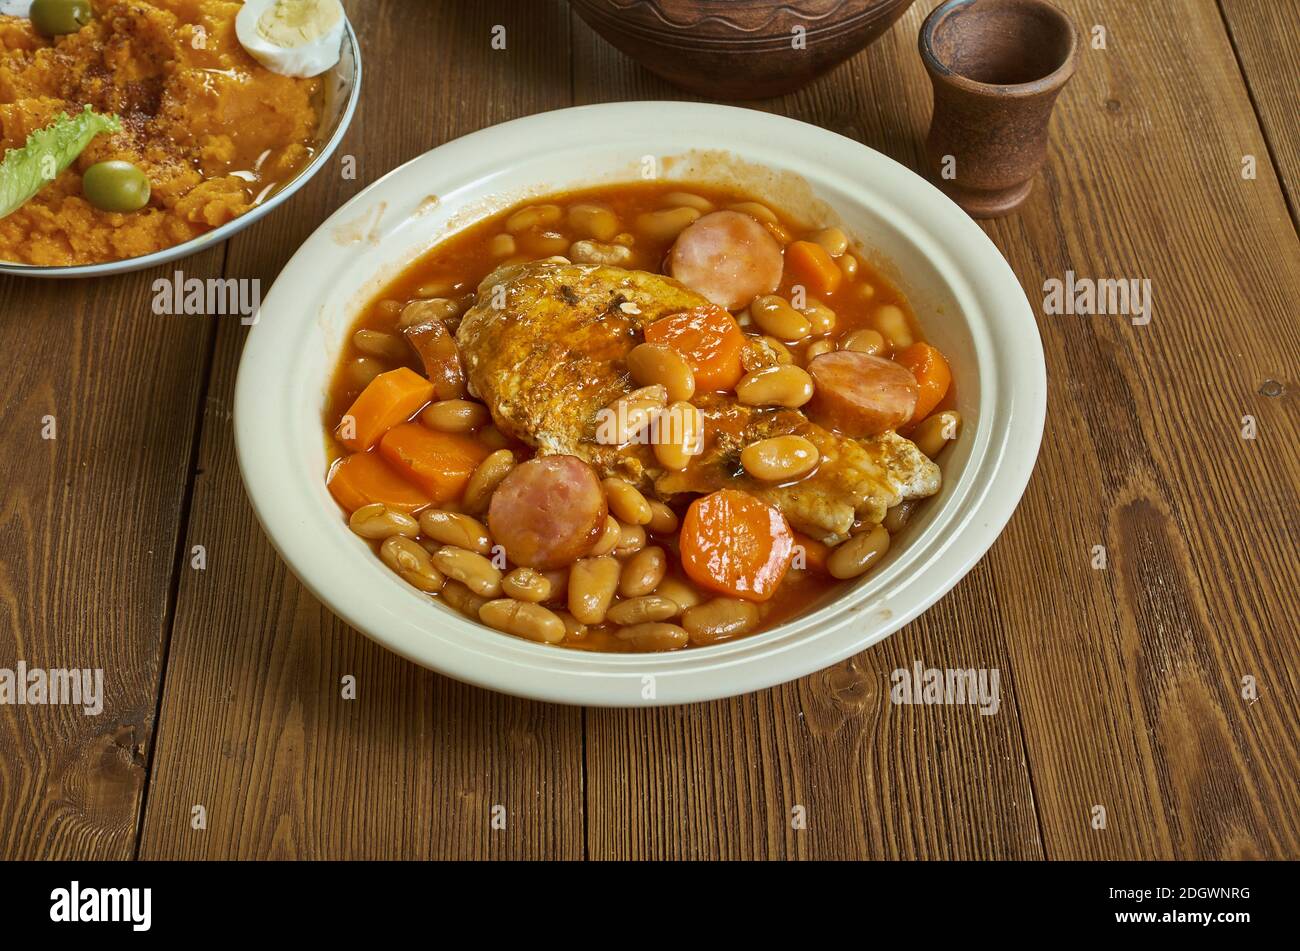 British pork cassoulet, filling pork dish with beans,pork sausages,  tomatoes and carrots Stock Photo